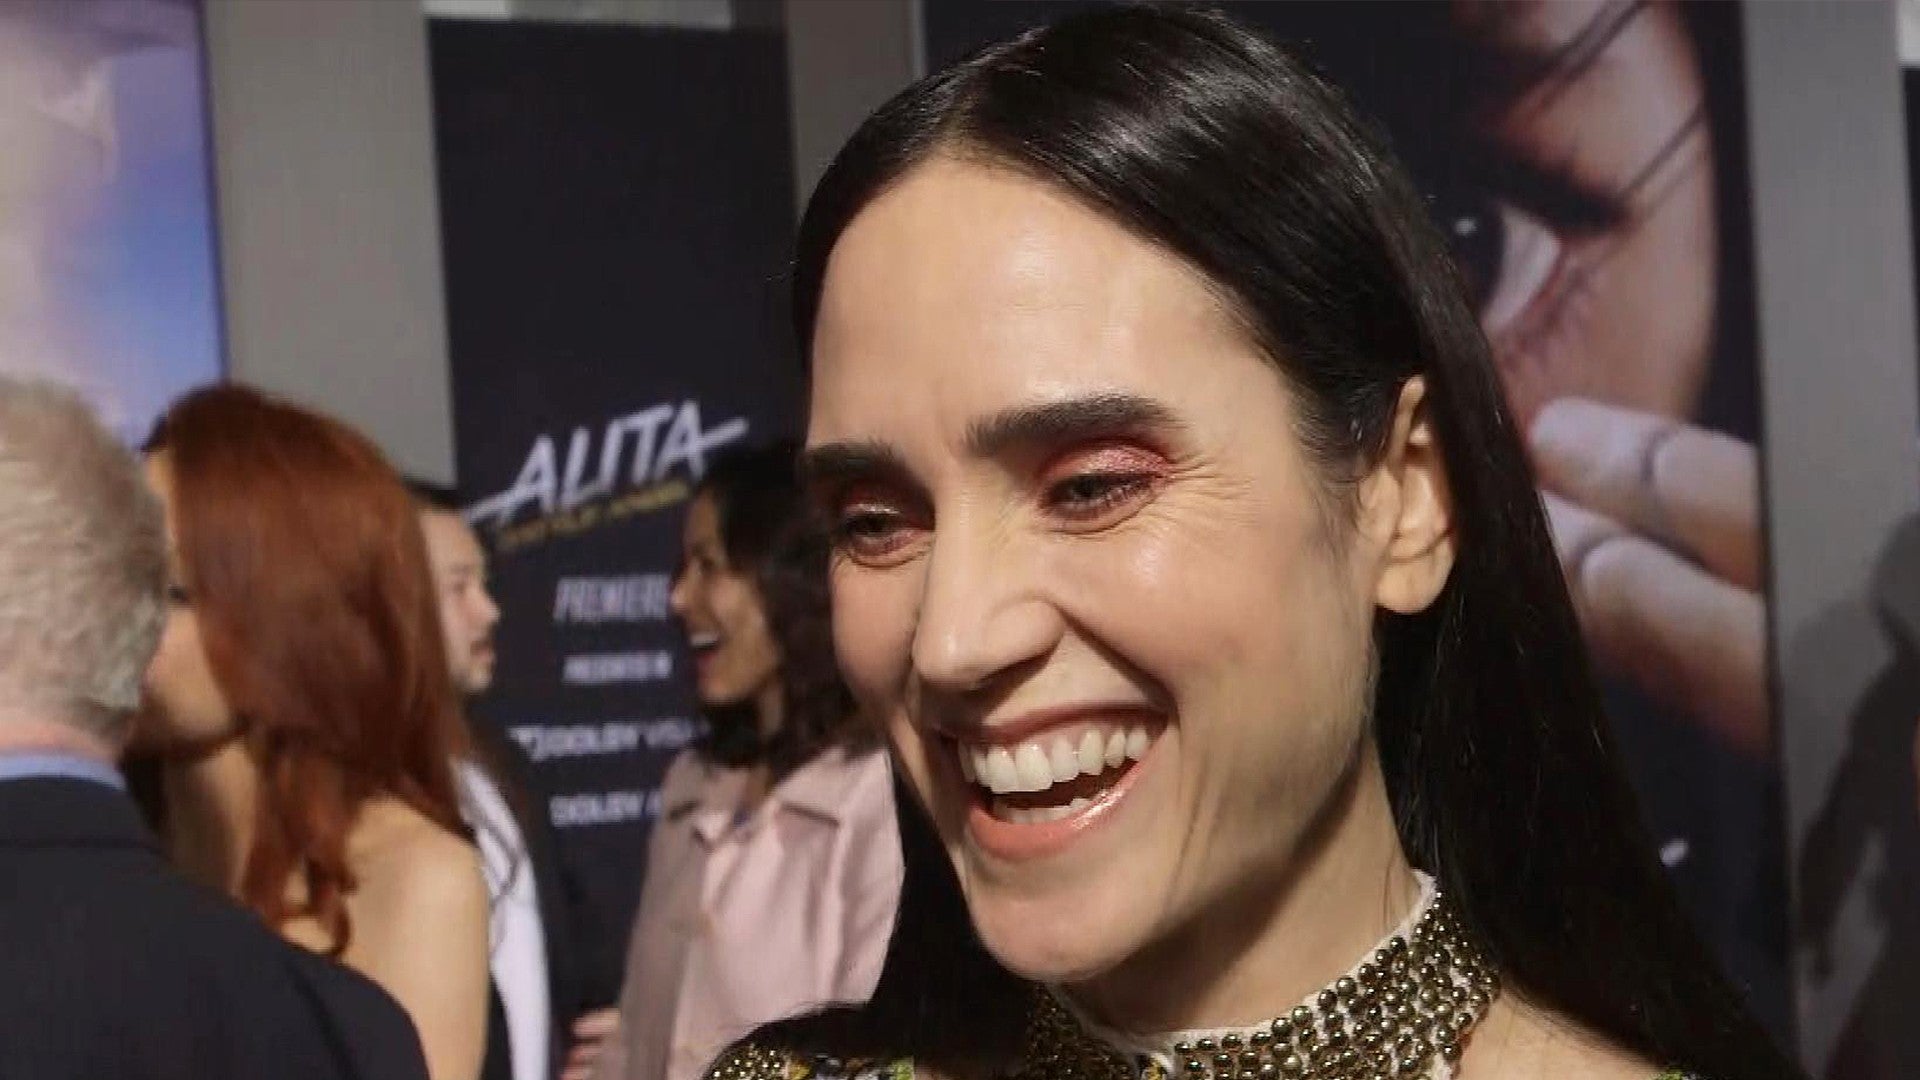 He's Just Not That Into You' Turns 10! Jennifer Connelly Reflects